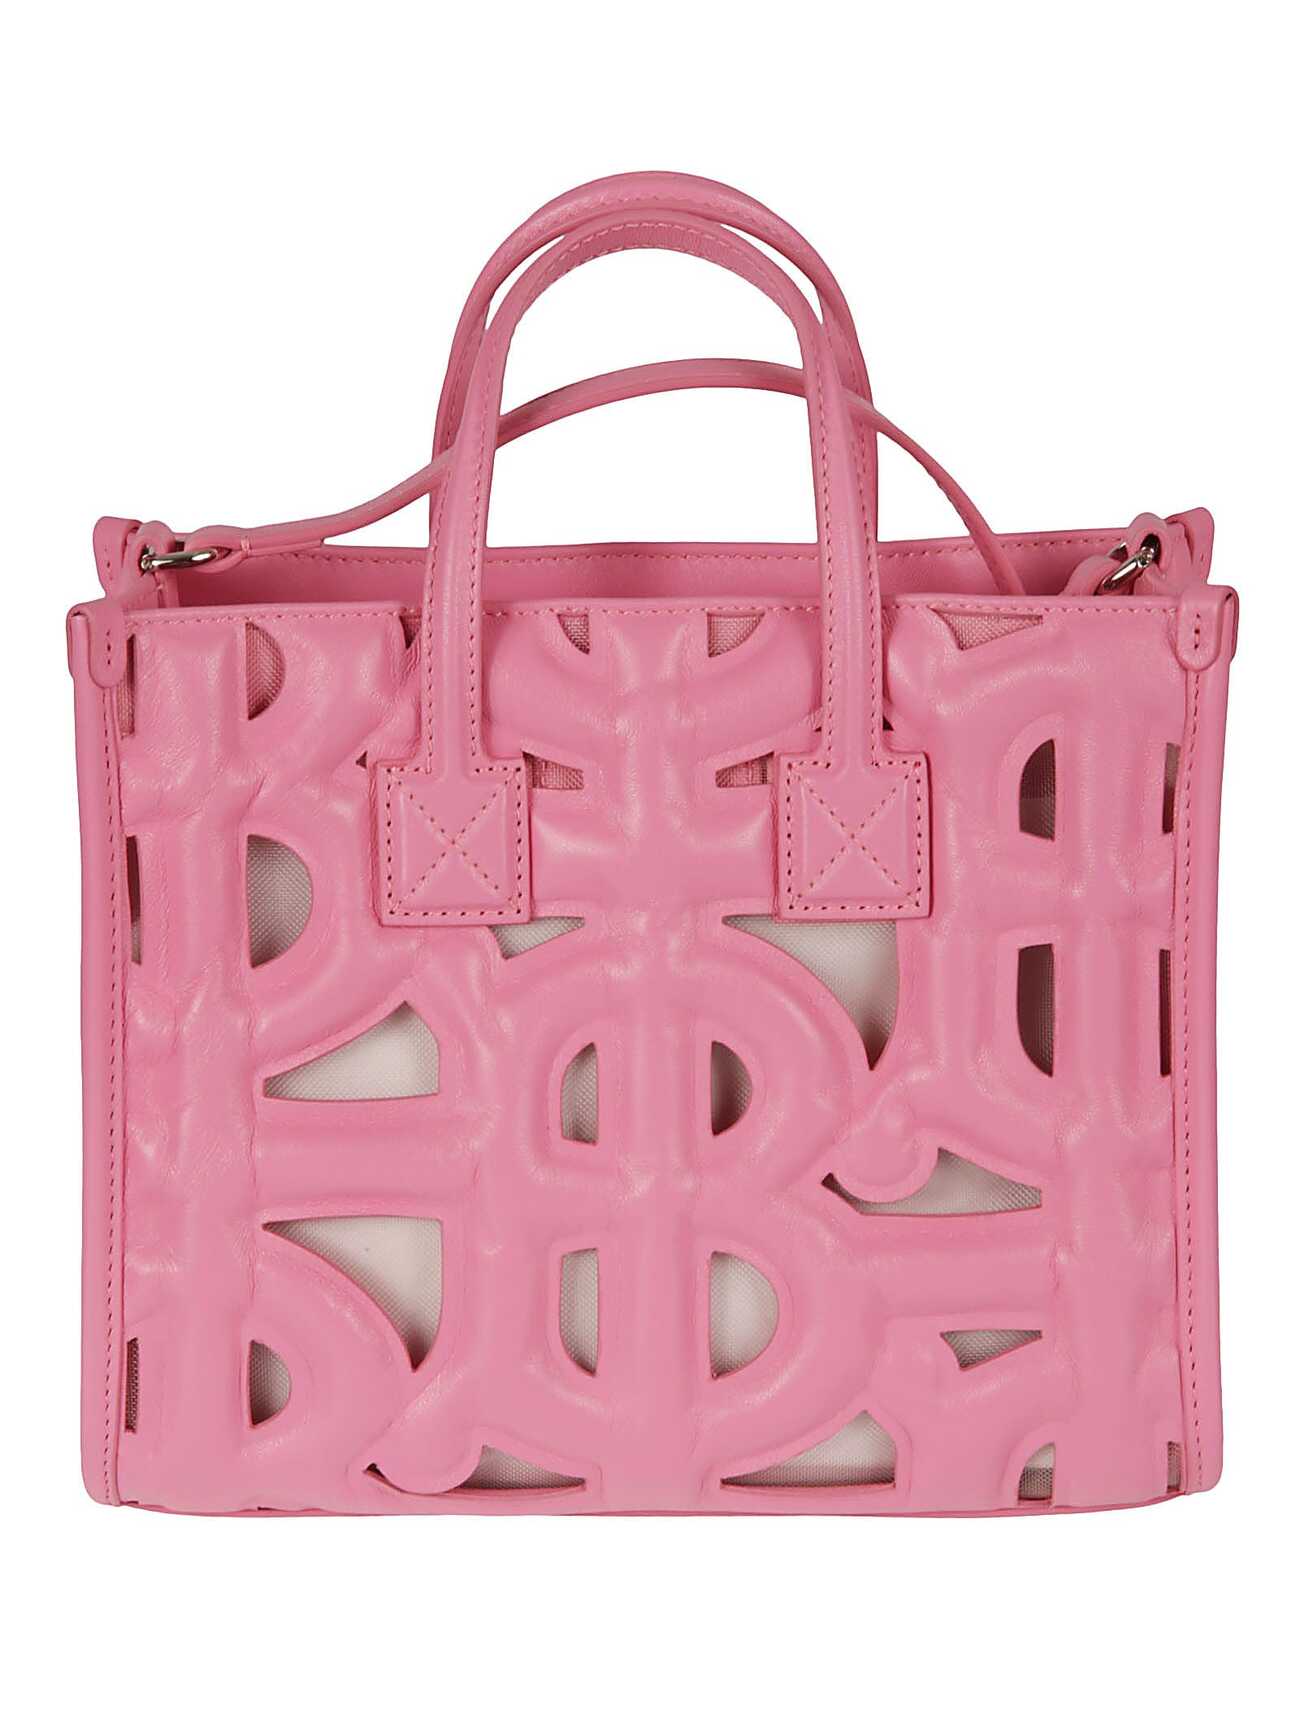 Burberry Freye Tote in pink